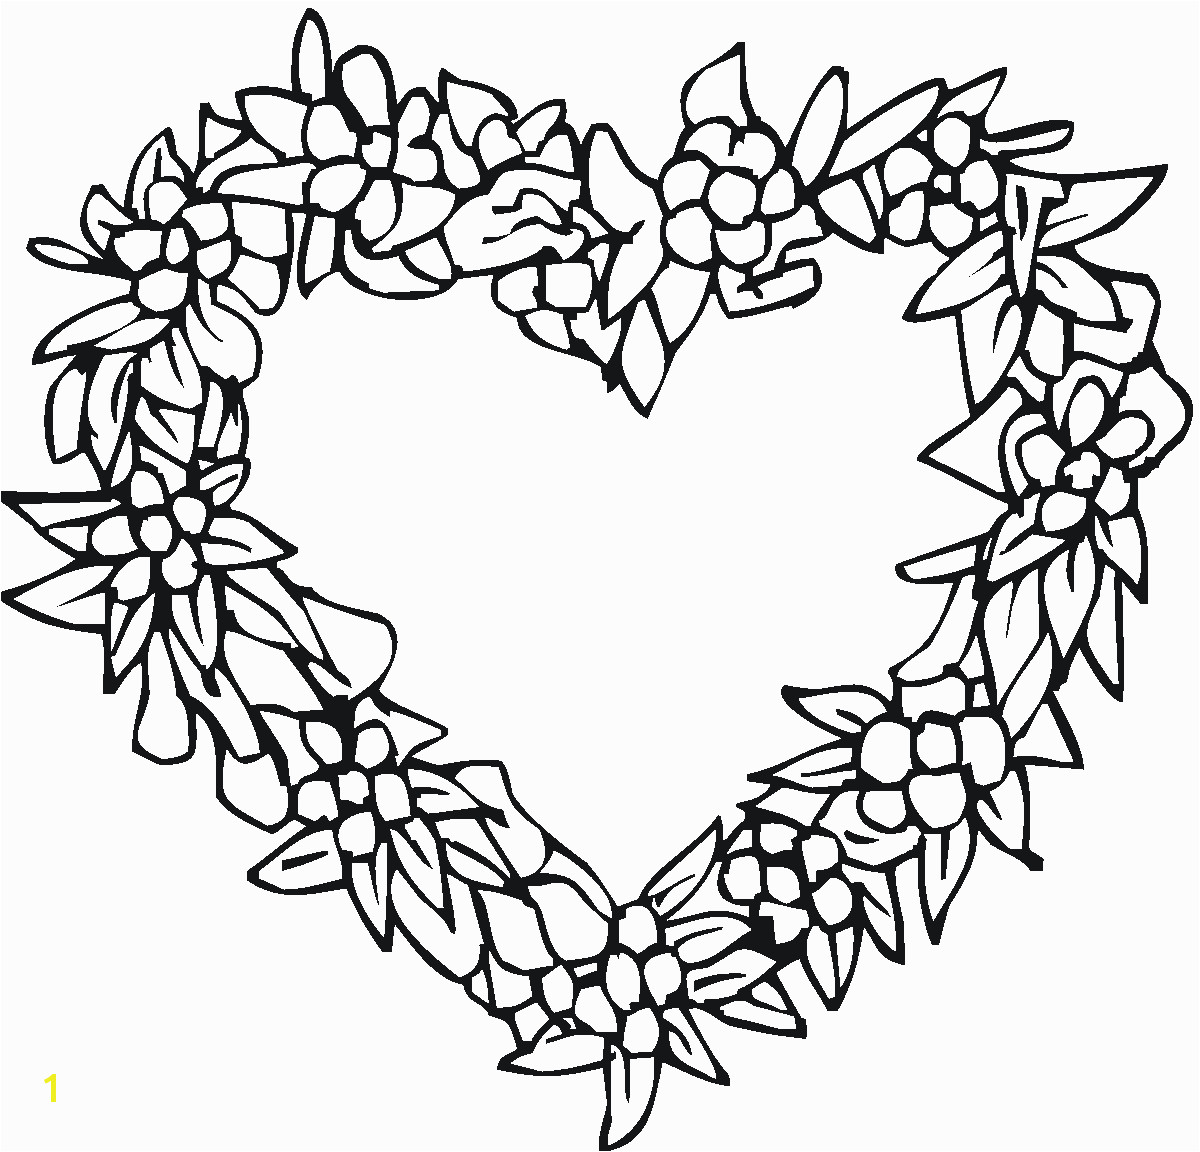 coloring pages hearts